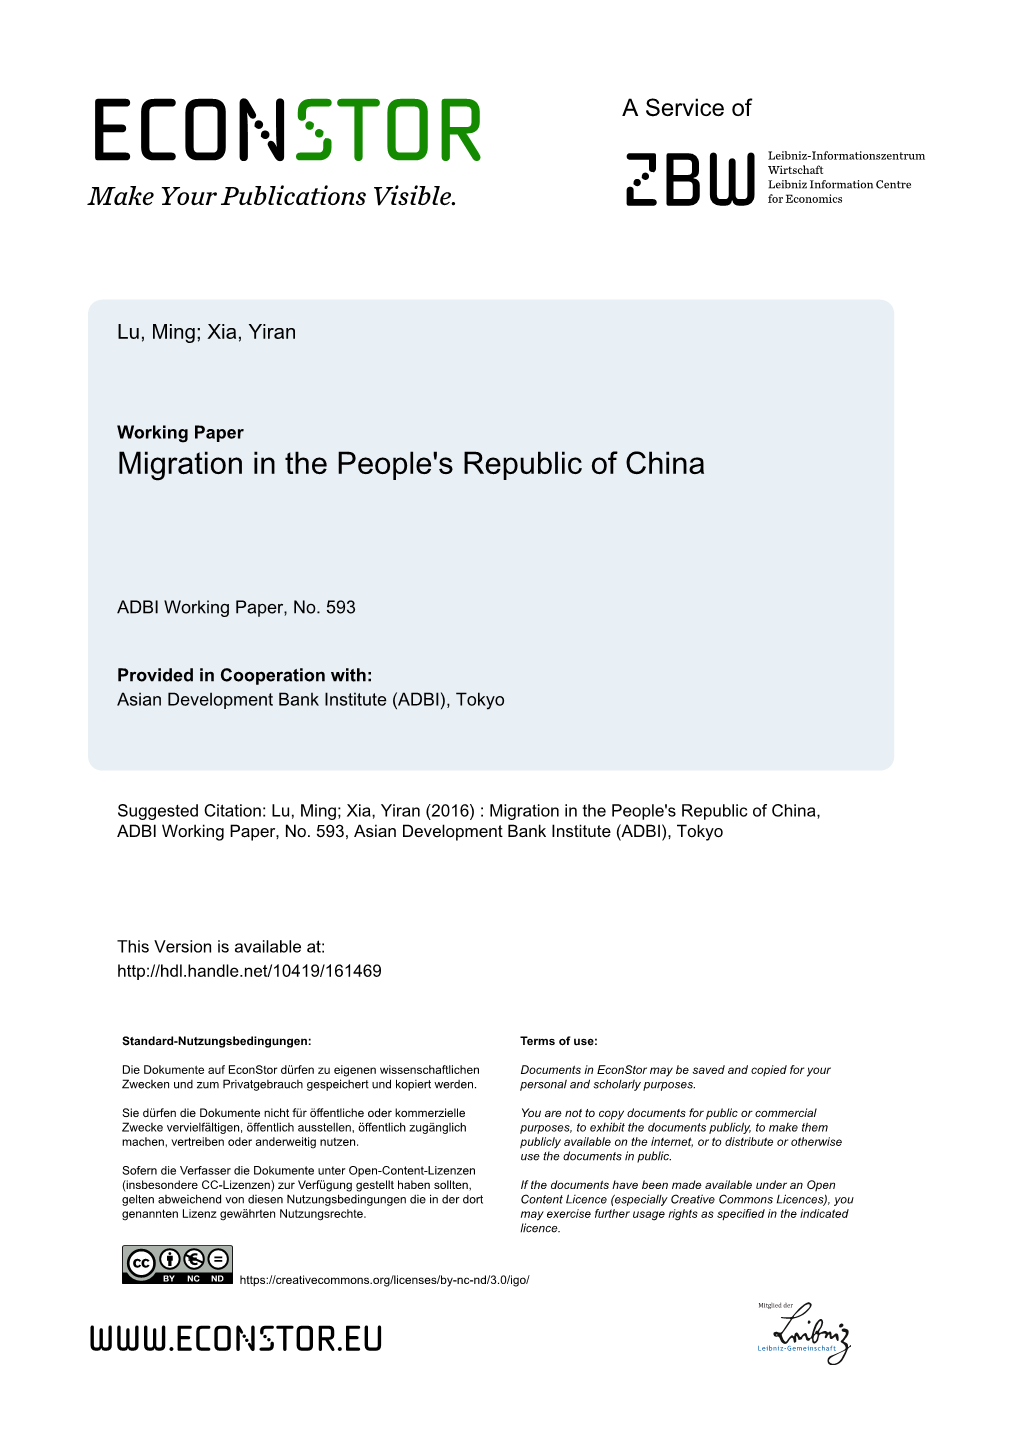 Migration in the People's Republic of China